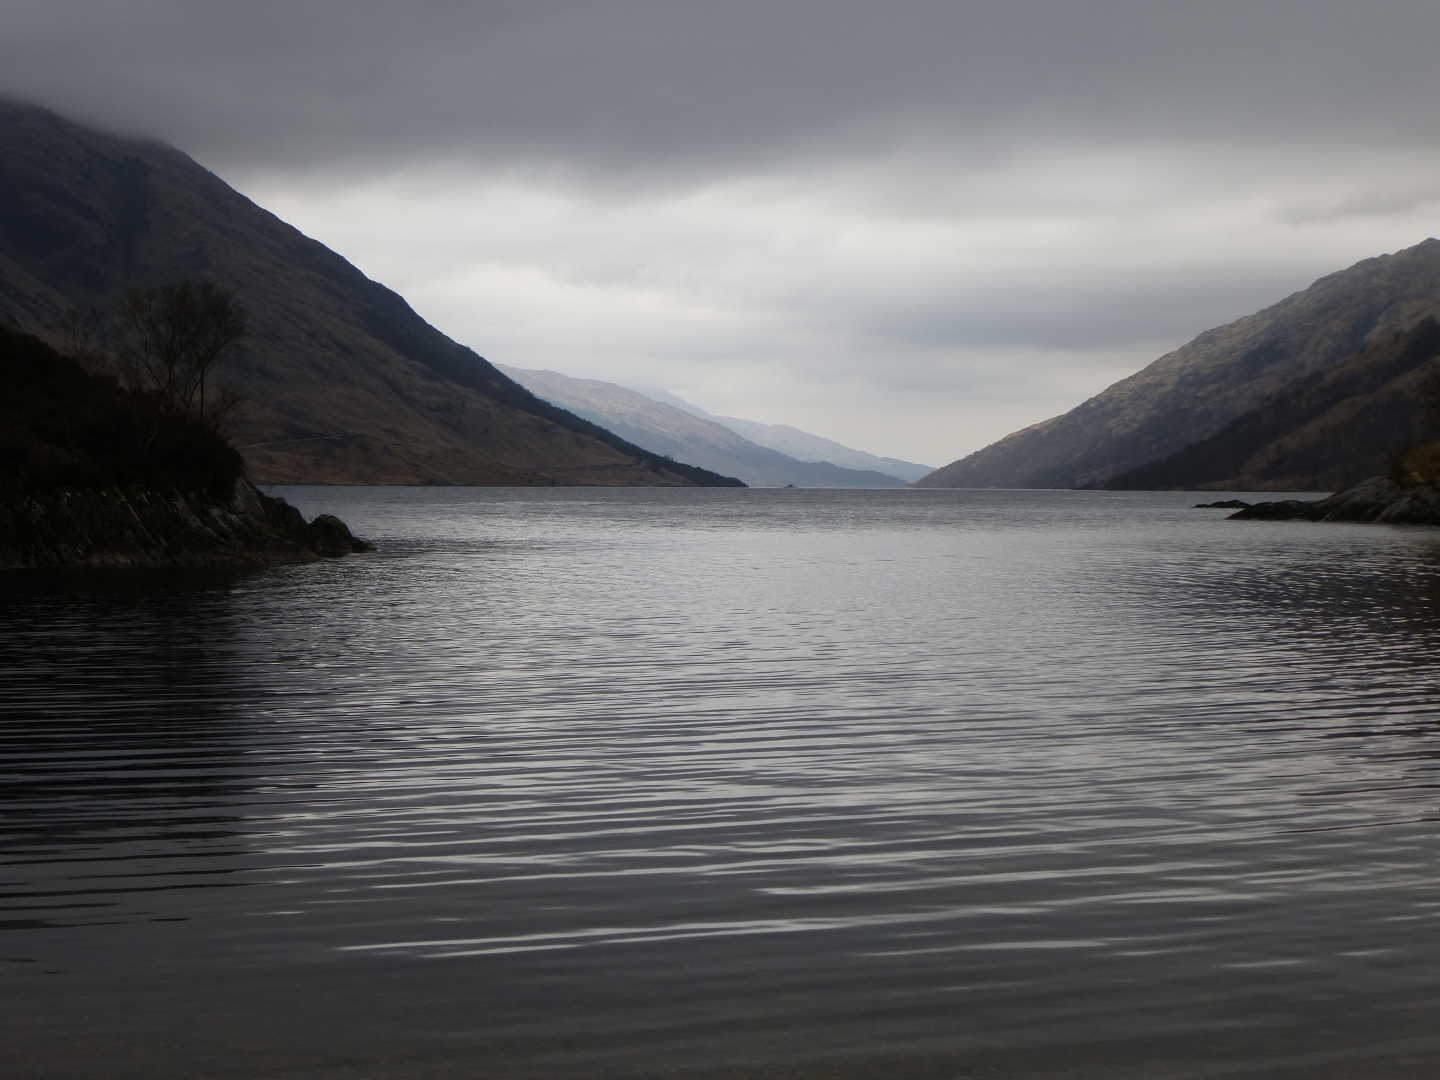 A view of the loch on a slightly more grey day